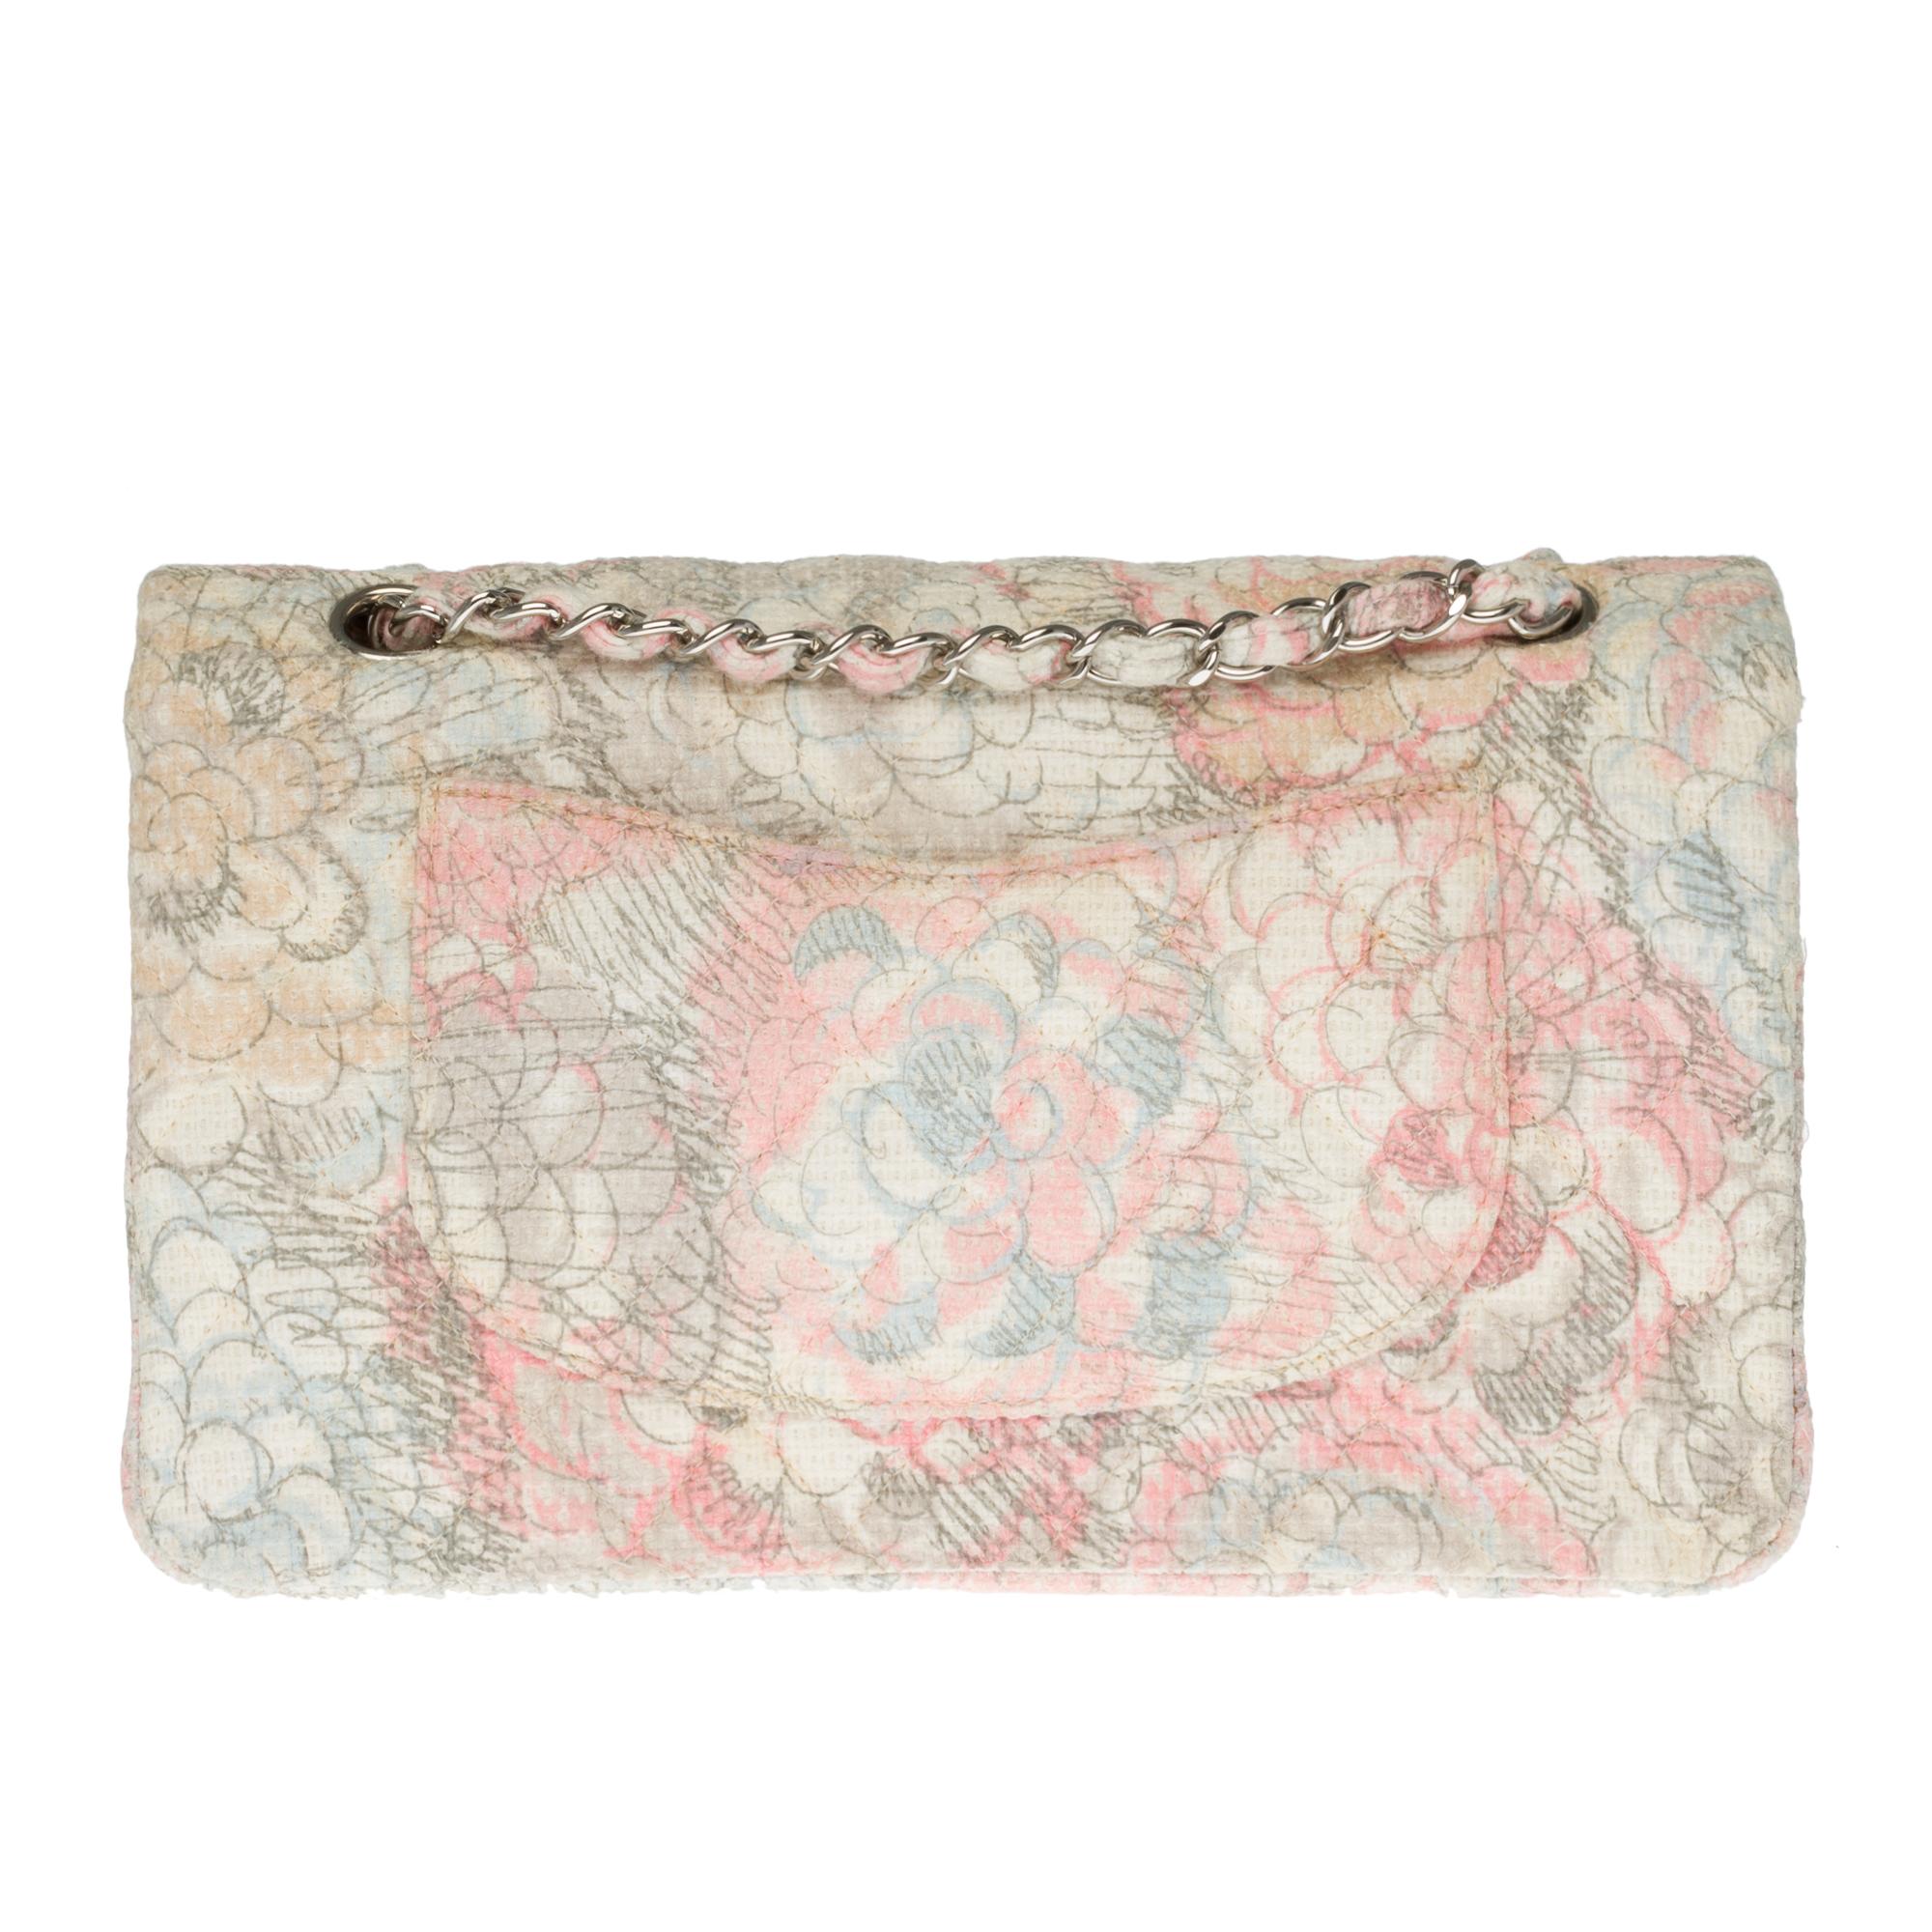 VERY RARE & COVETED!

Timeless bag out of Tweed Camellia pink, grey and ivory partially quilted , silver metal hardware, silver metal handle intertwined with pink tweed, grey and ivory allowing a hand or shoulder.
Padded flap closure, silver metal